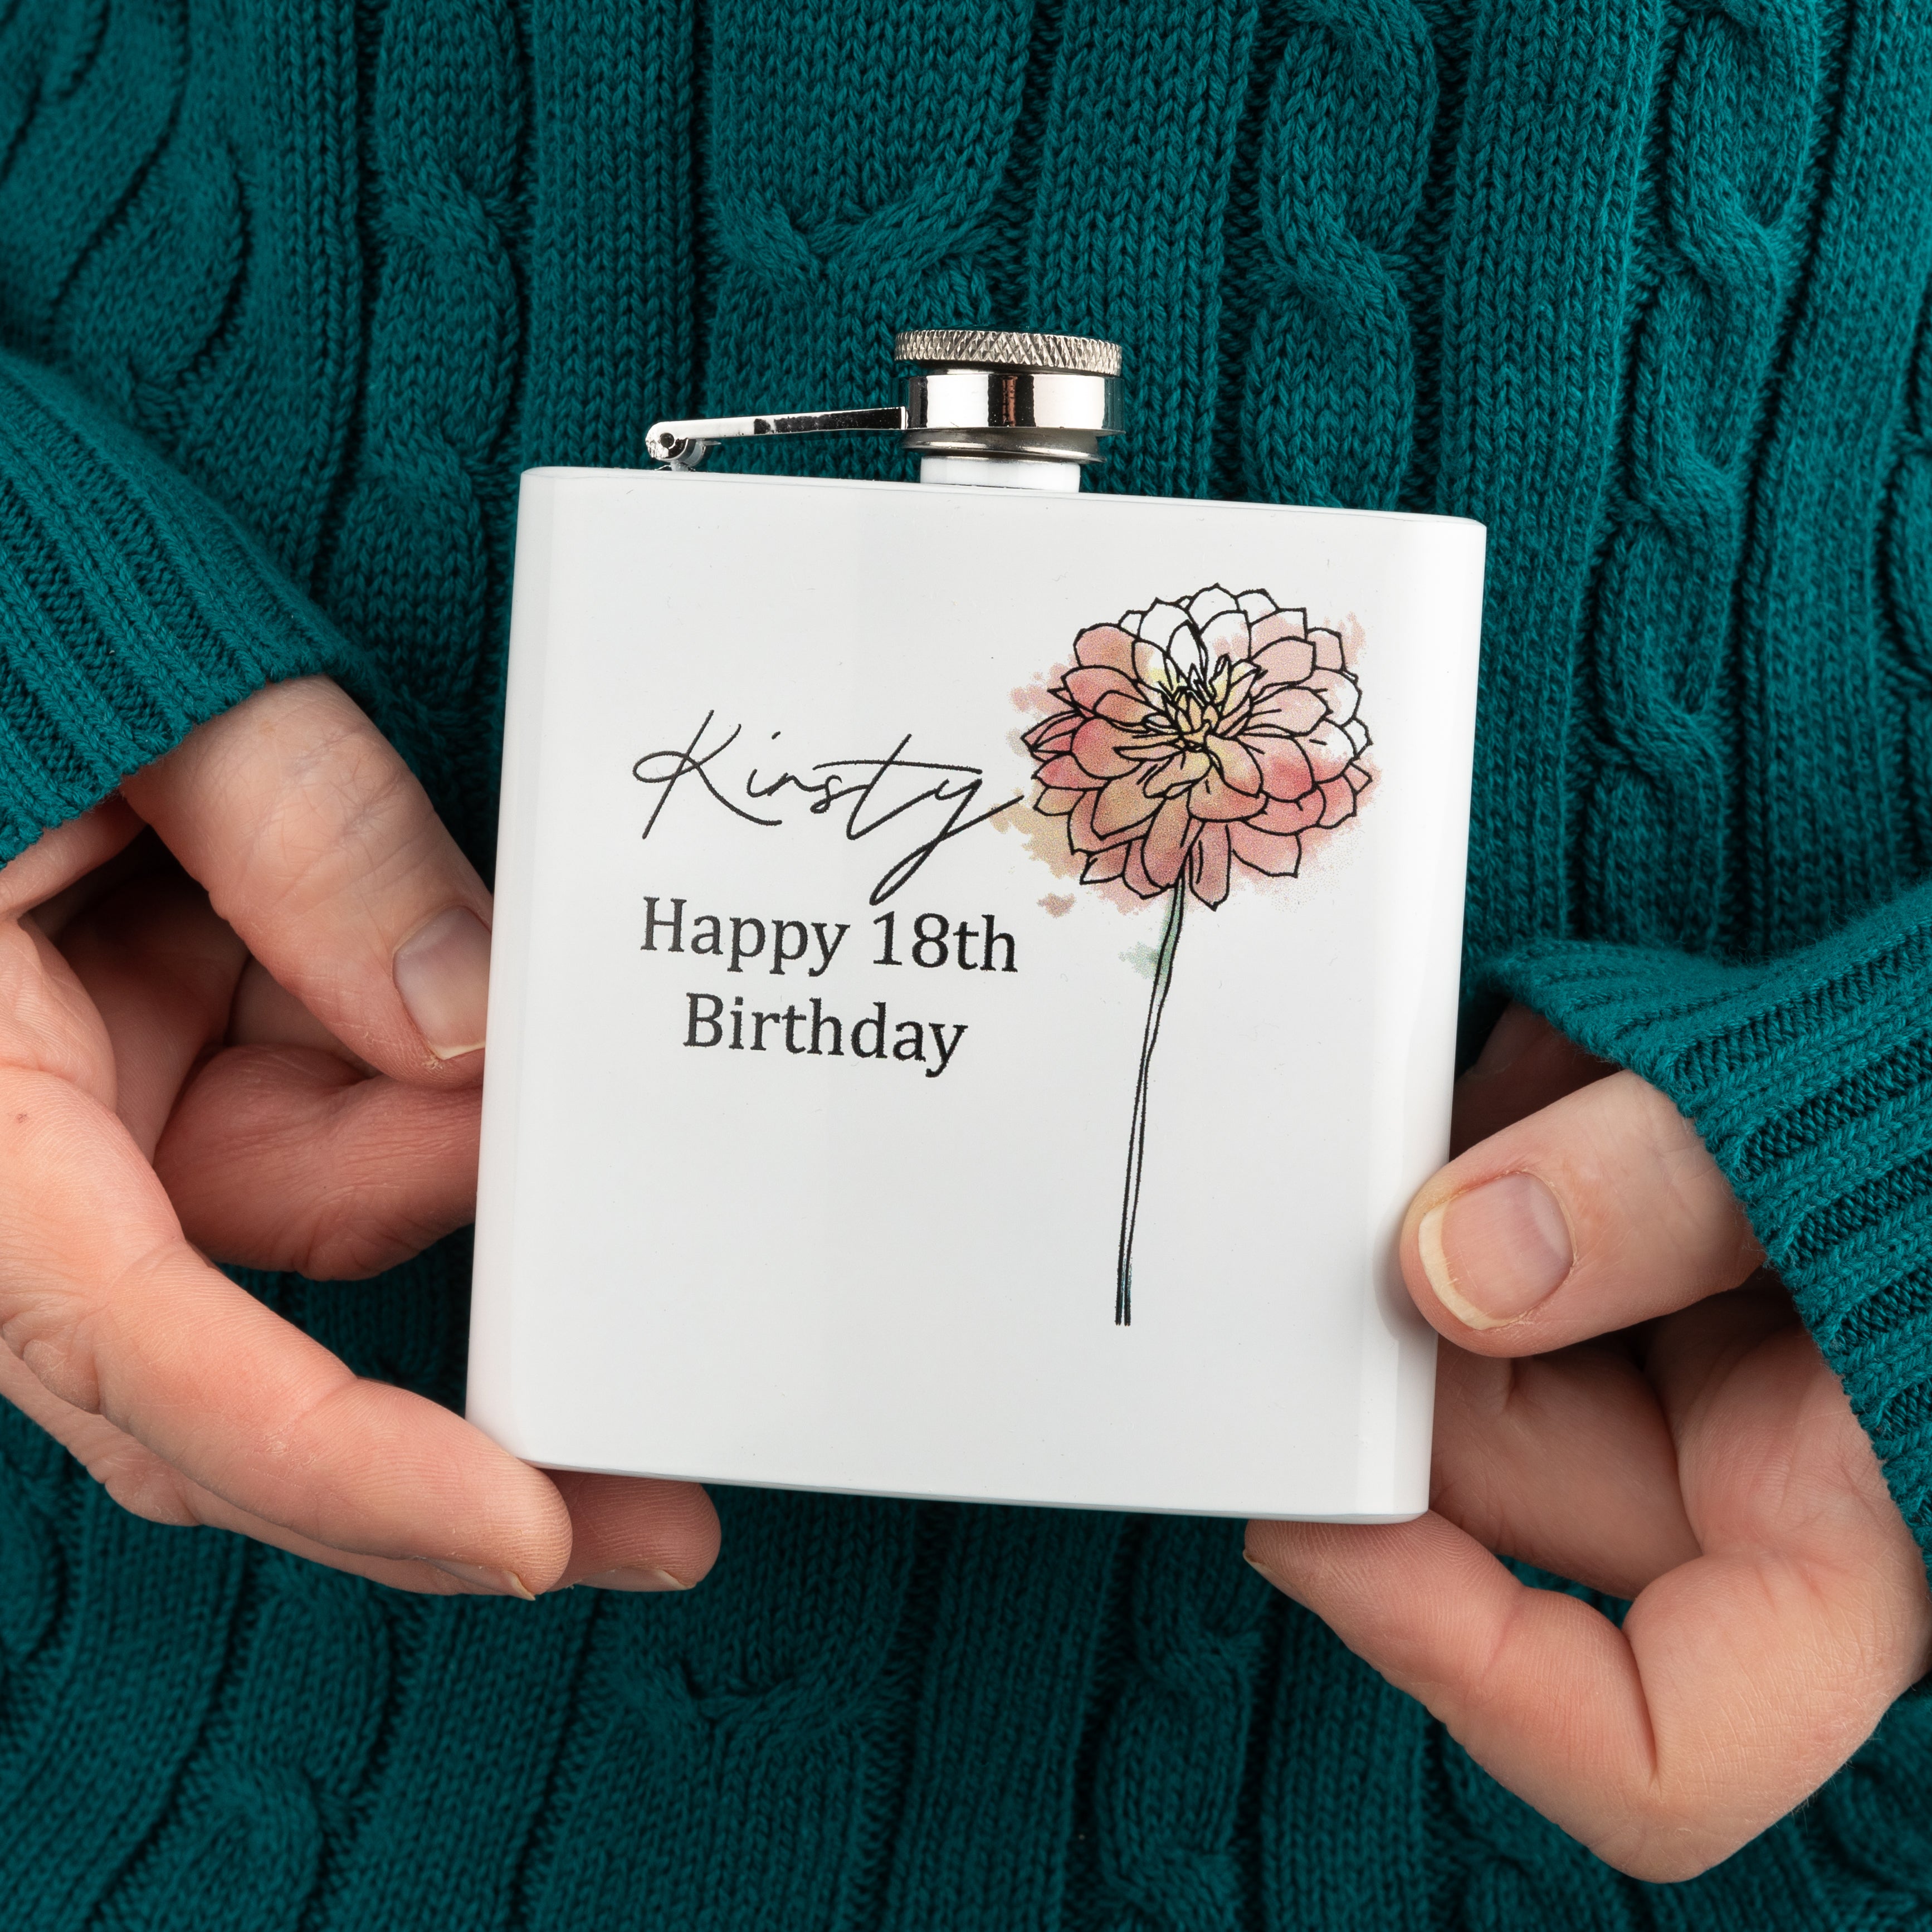 Personalised Birth Flower White Hip Flask